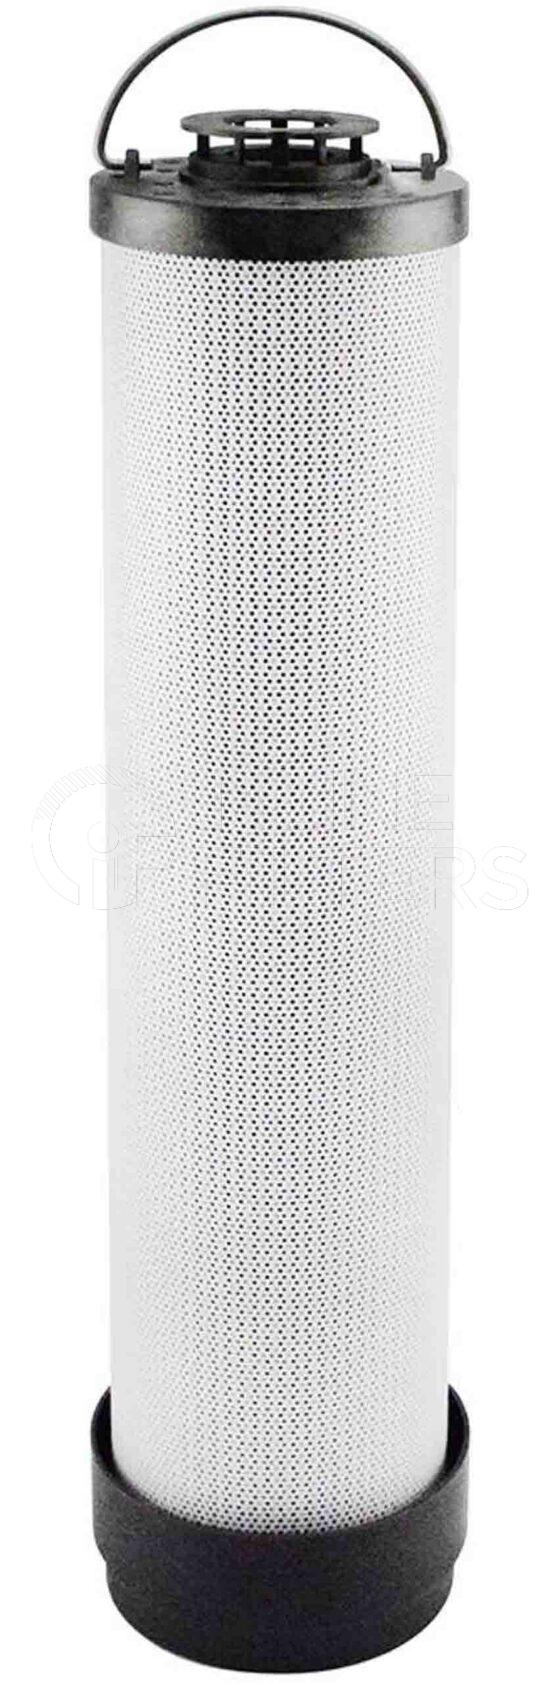 Inline FH52617. Hydraulic Filter Product – Cartridge – Tube Product Hydraulic filter cartridge with tube